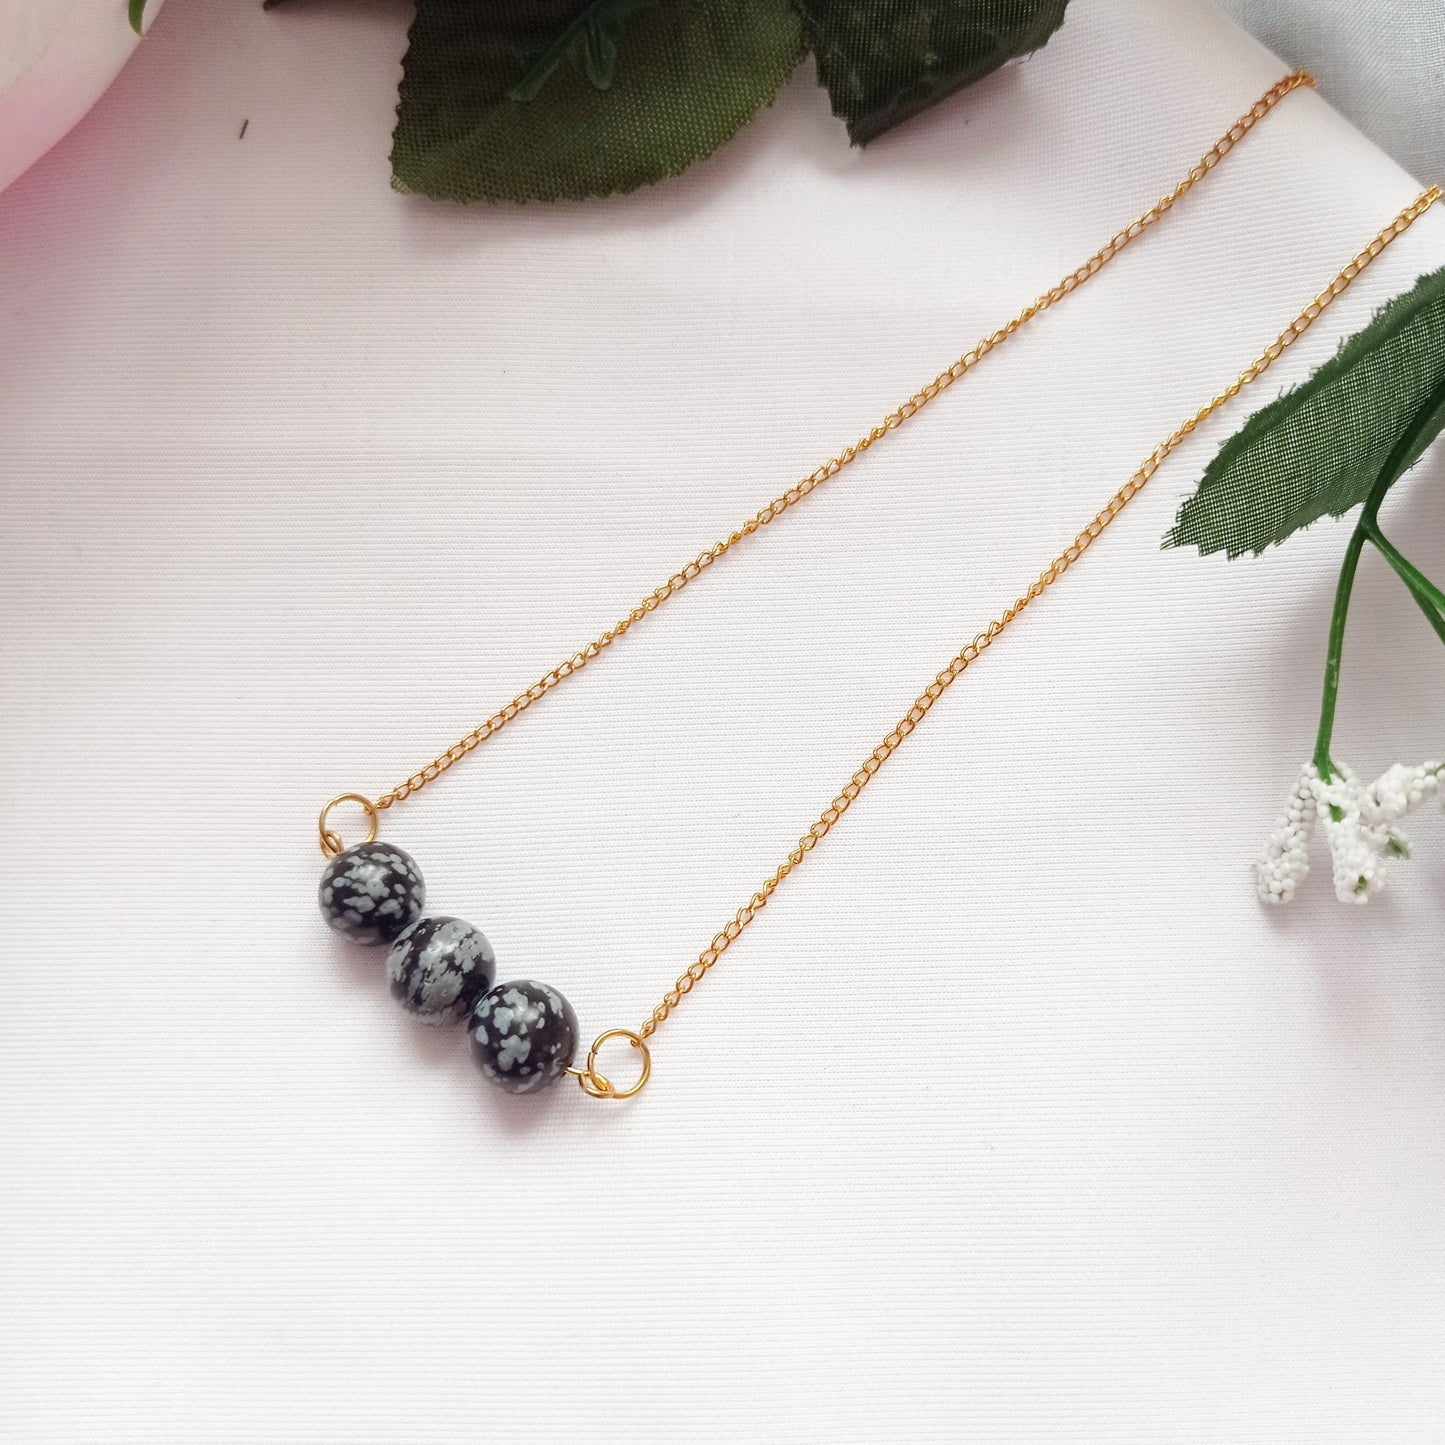 Snowflake Obsidian Yellow Gold Vermeil Necklace, Snowflake Obsidian Bar Necklace, Gemstone Bar Necklace, Pendant Necklace | by nlanlaVictory-1